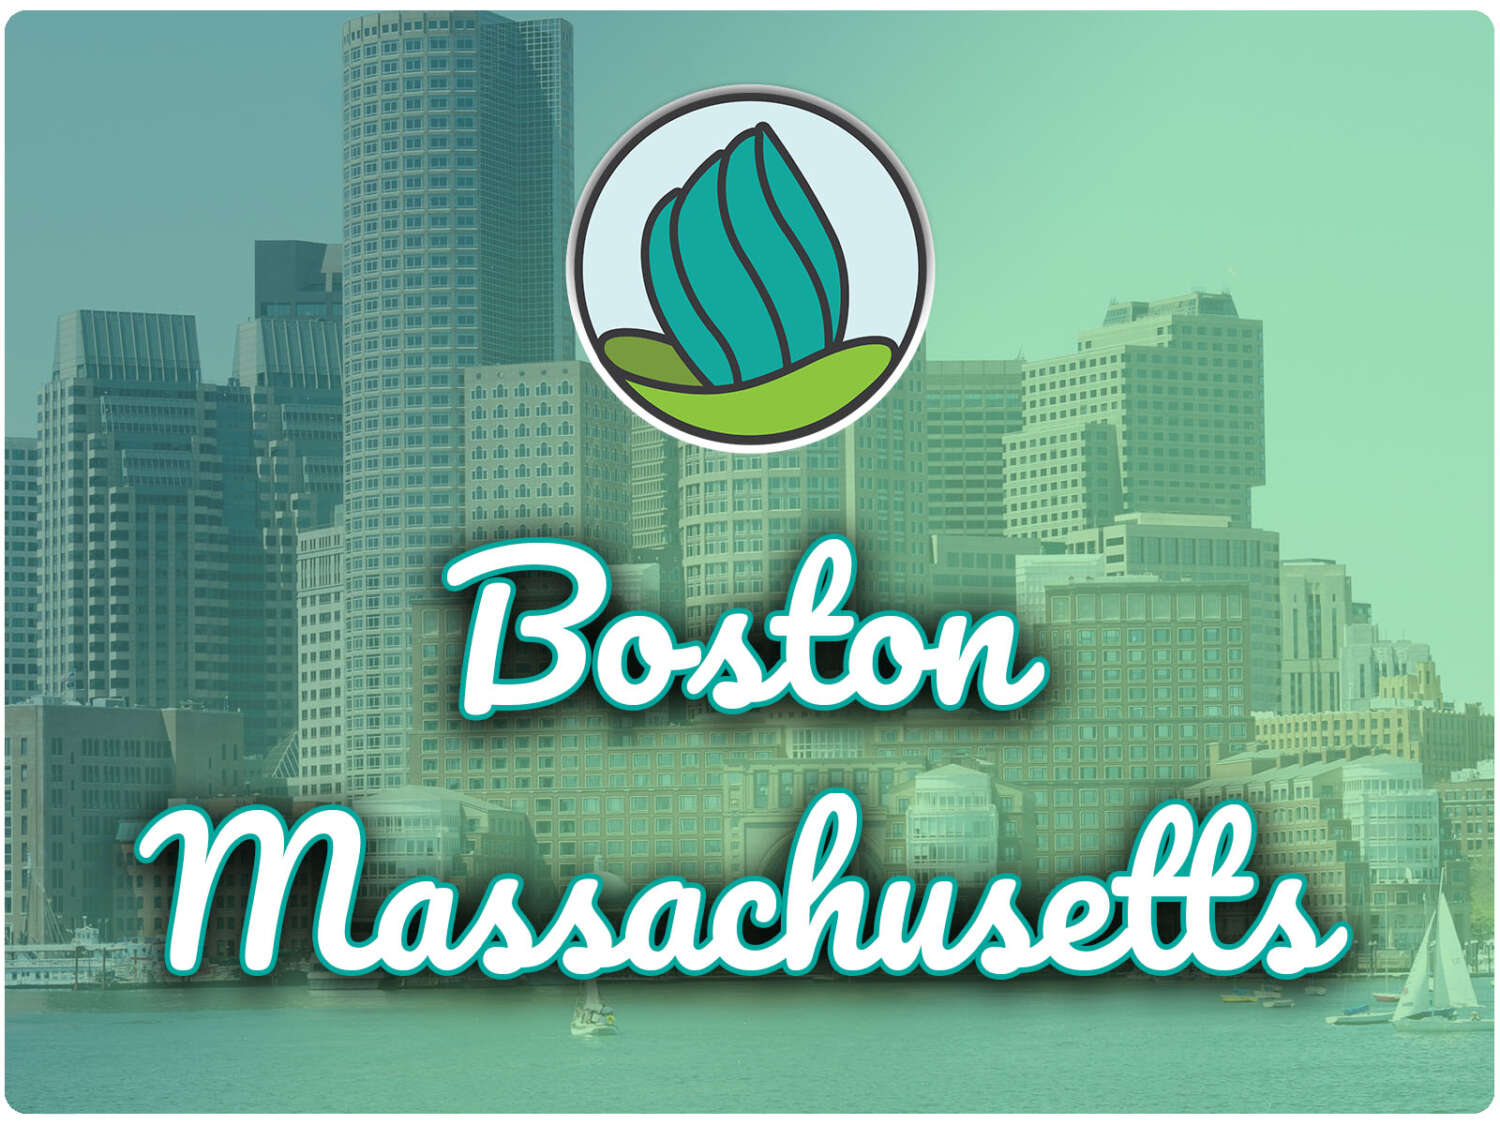 This image shows tall buildings in the background. In the top center, there is the logo of NDC and below there is the text " Boston Massachusetts"